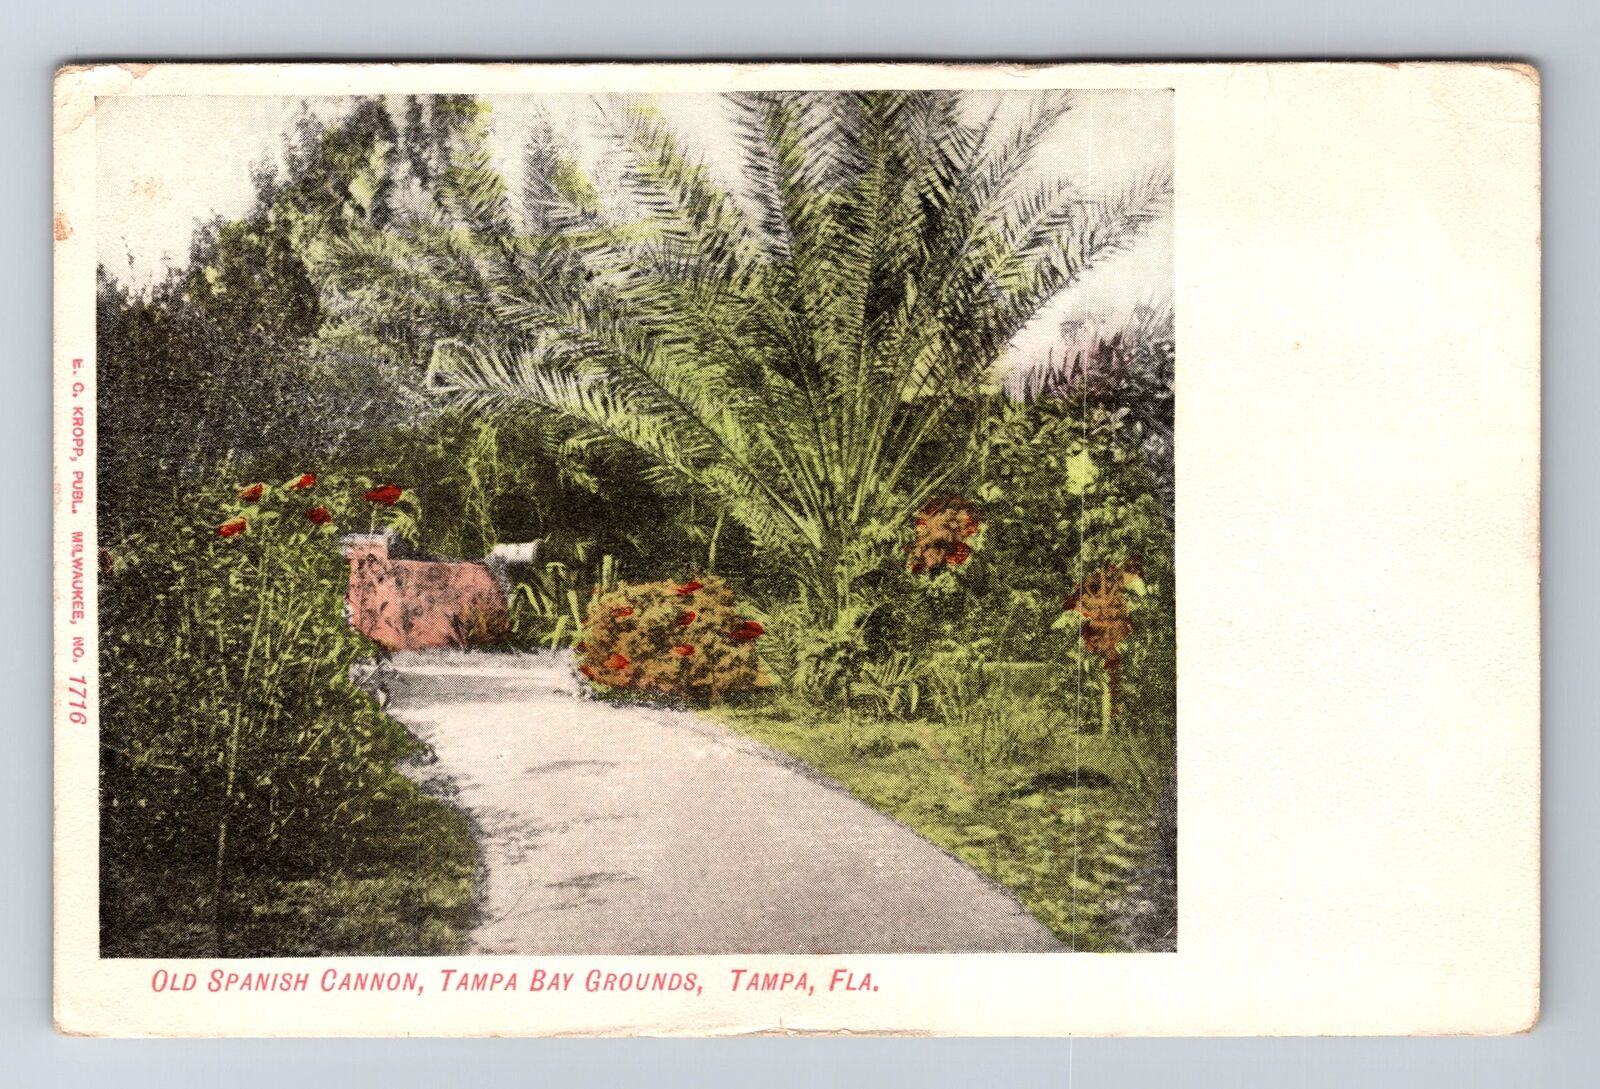 Tampa FL-Florida, Old Spanish Cannon, Tampa Bay Grounds, Vintage Card Postcard